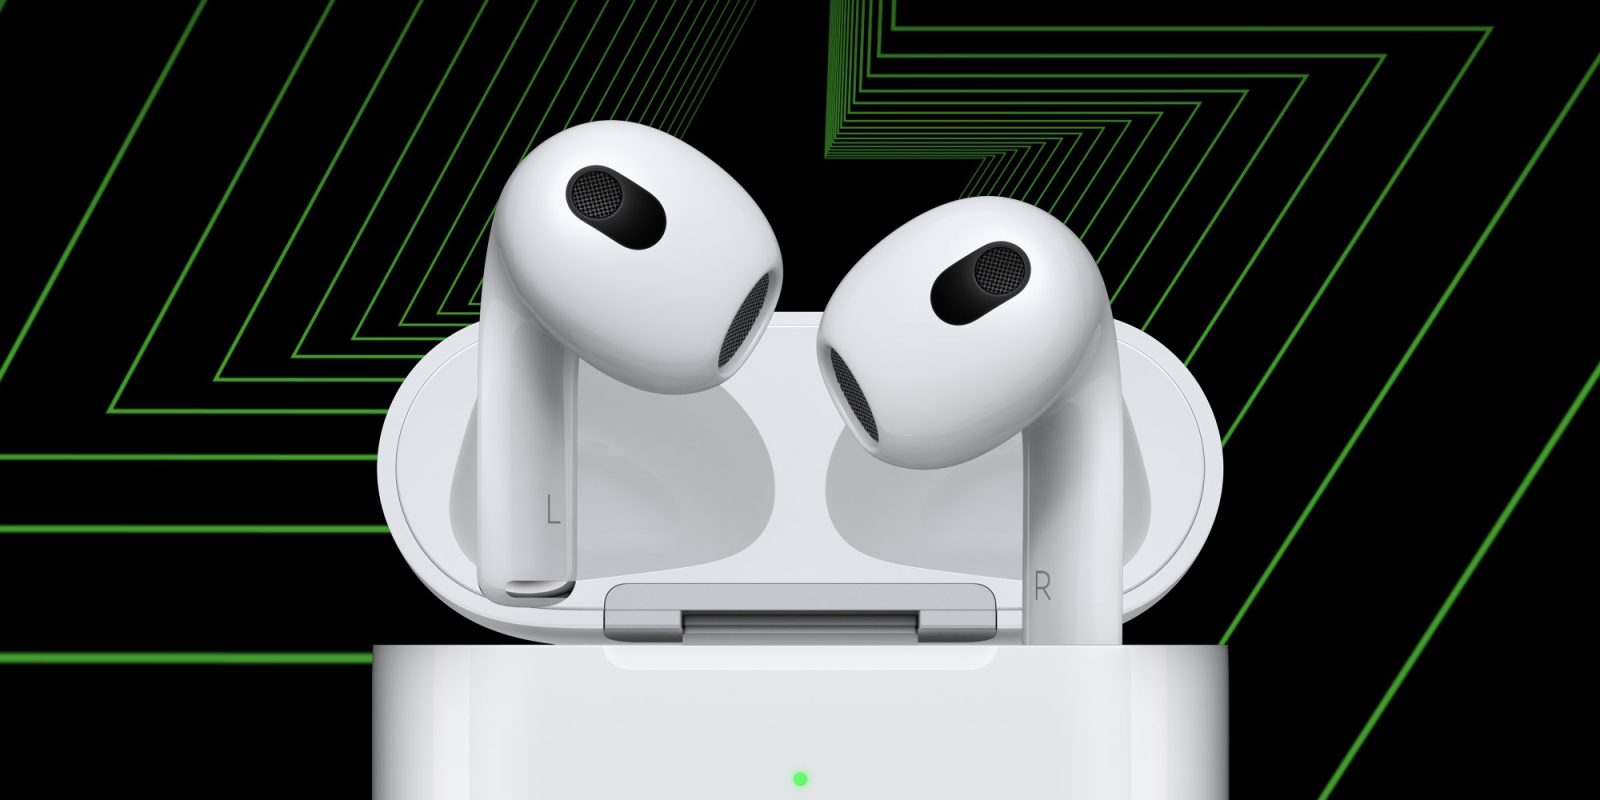 AirPods Pro 3rd Generation Said to Bring Refreshed Design, H3 Chip